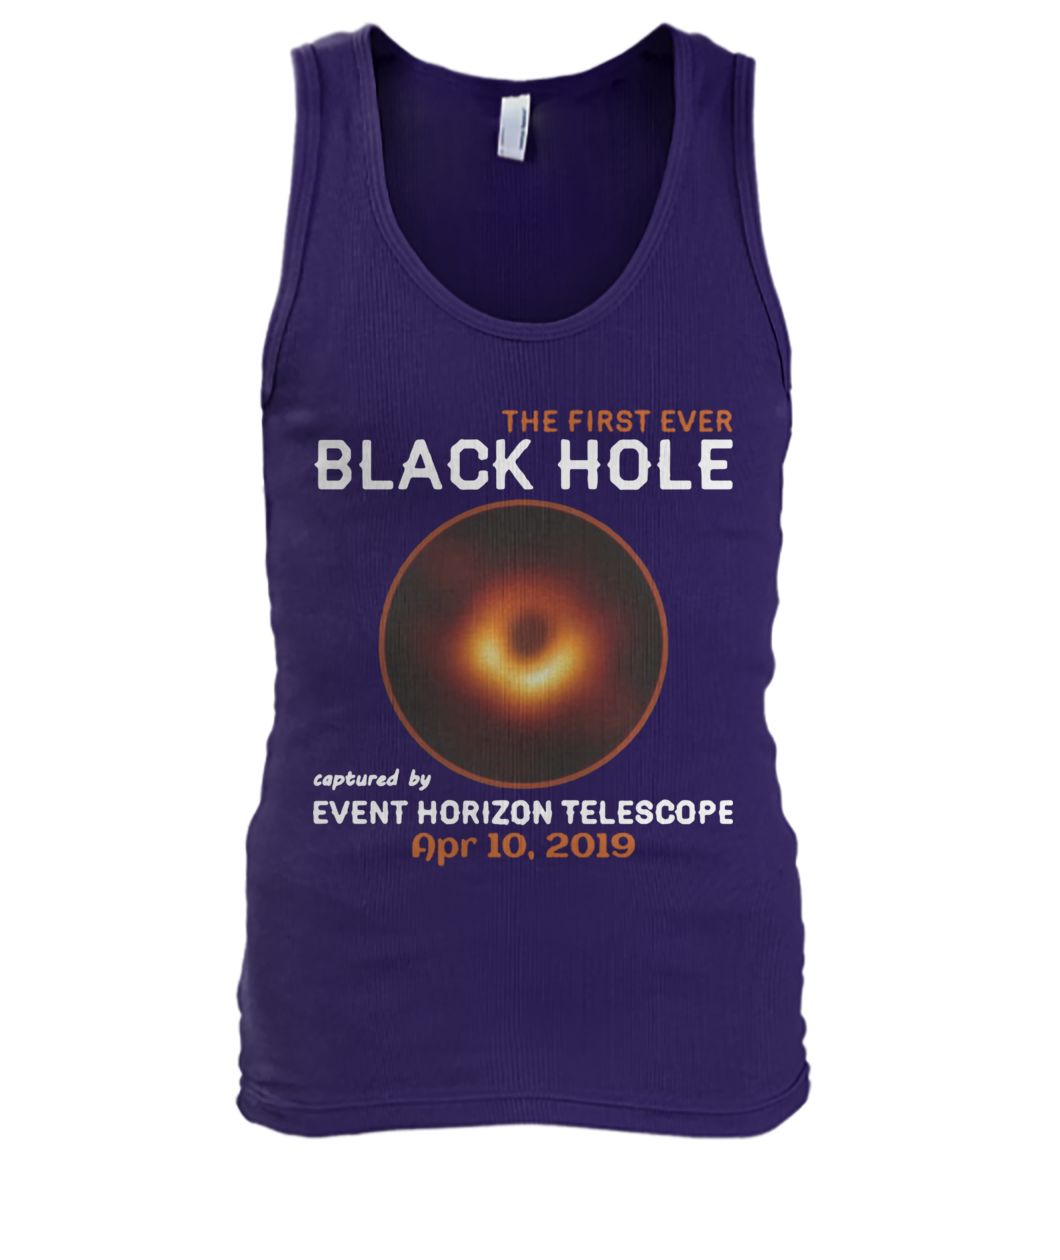 The first ever black hole captured by event horizon telescope april 10th 2019 men's tank top